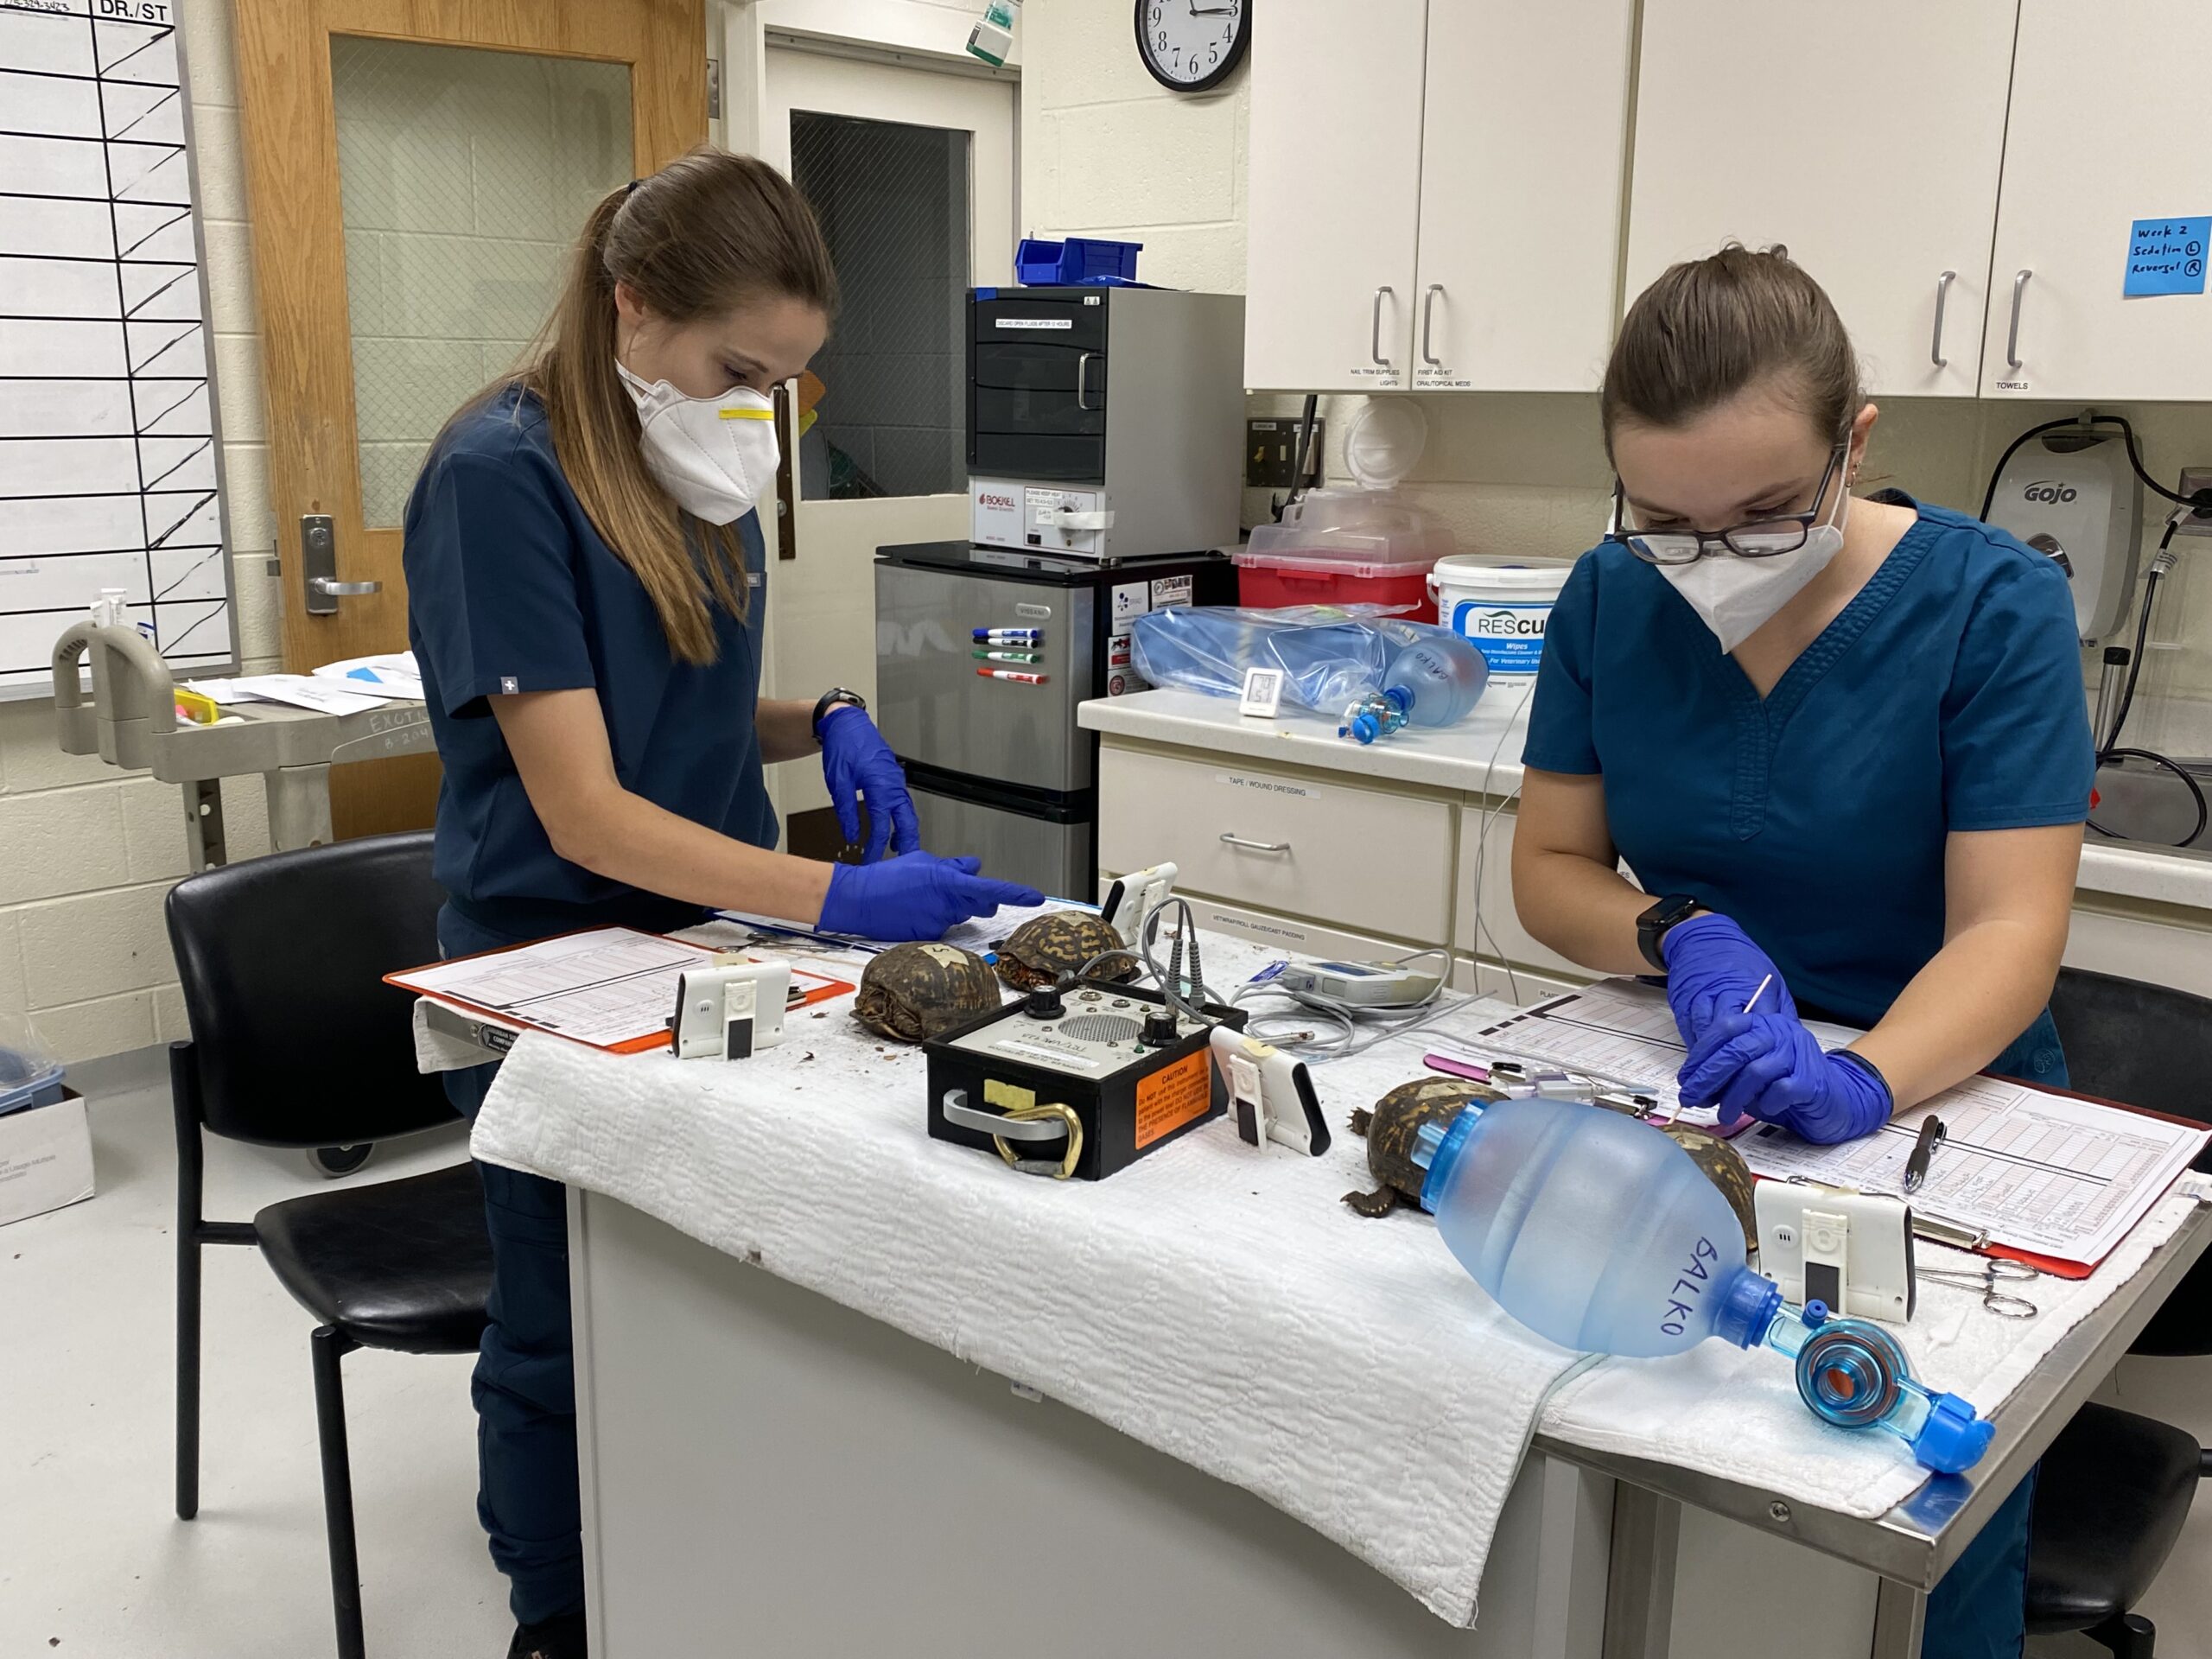 Two female veterinary students wearing KN95 masks examine one box turtle each on an examination table as part of an anesthesia study.